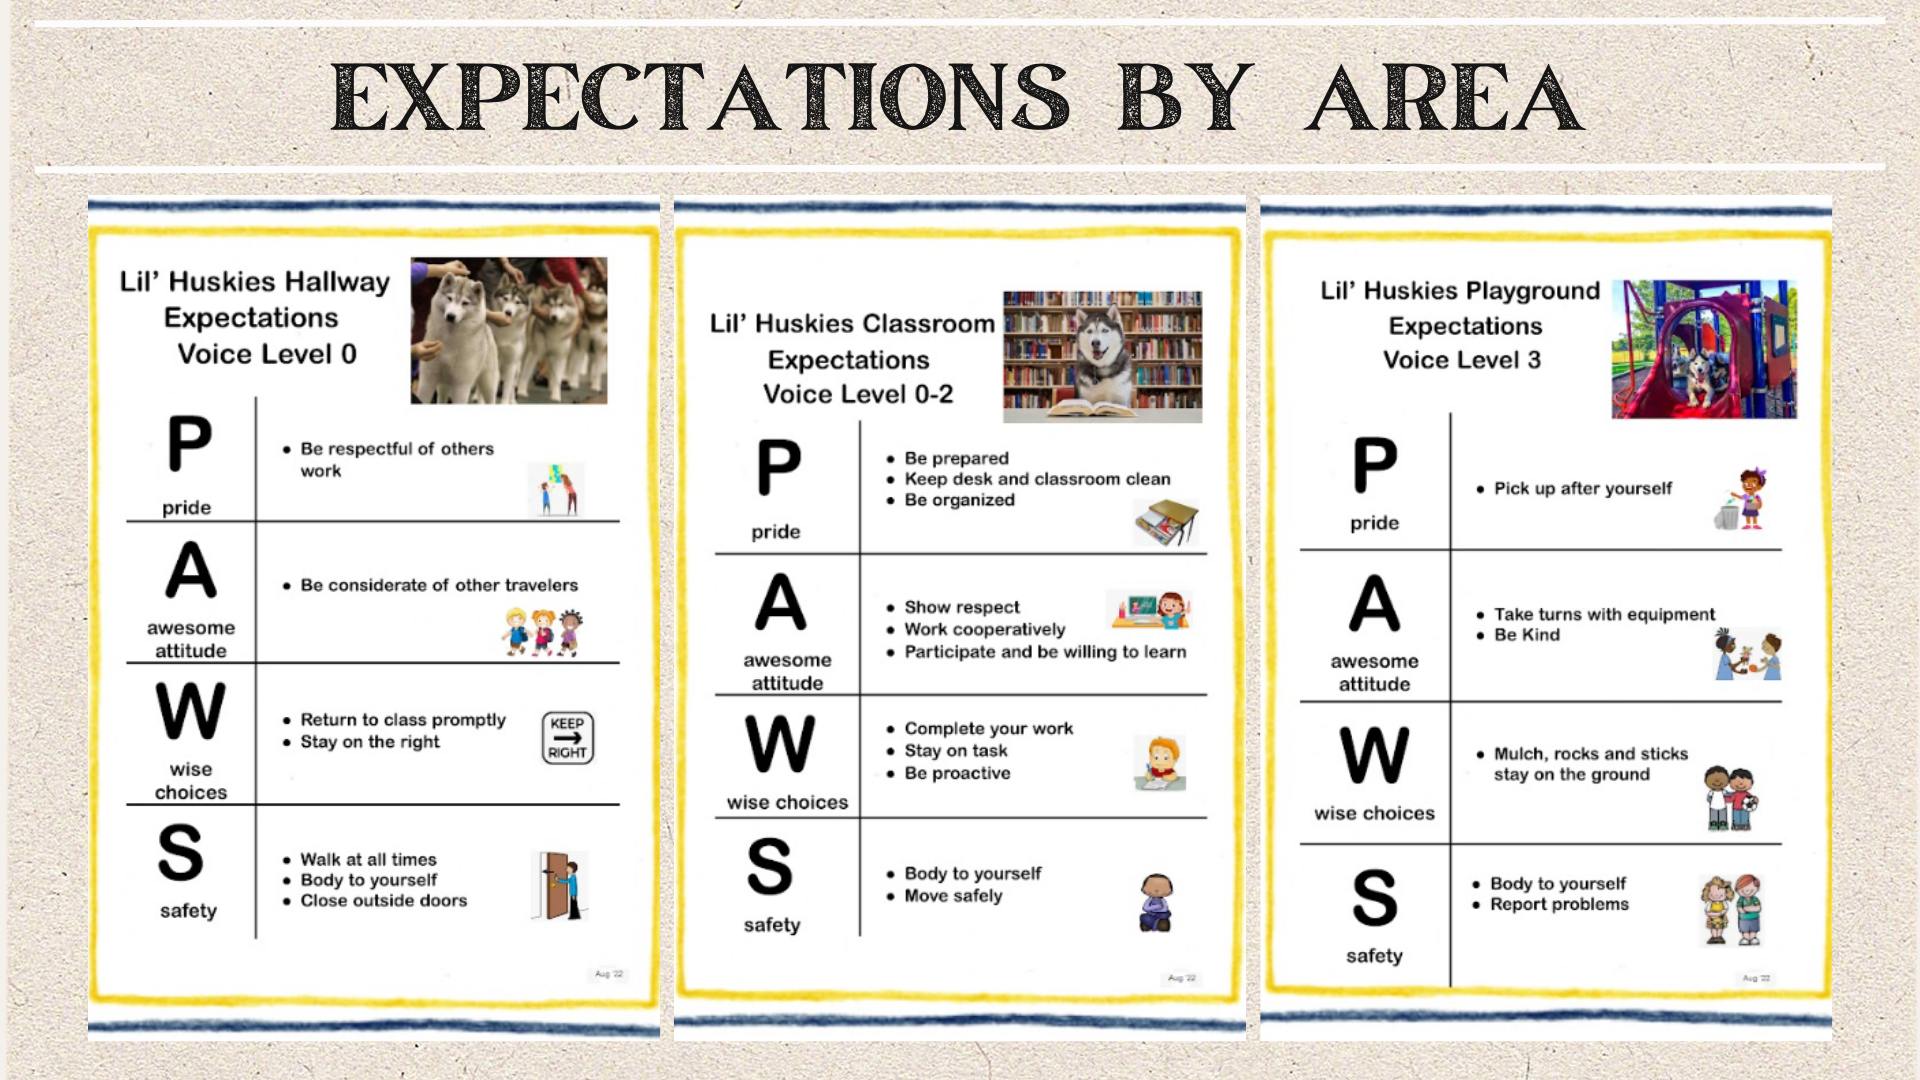 Image displaying expectations by areas